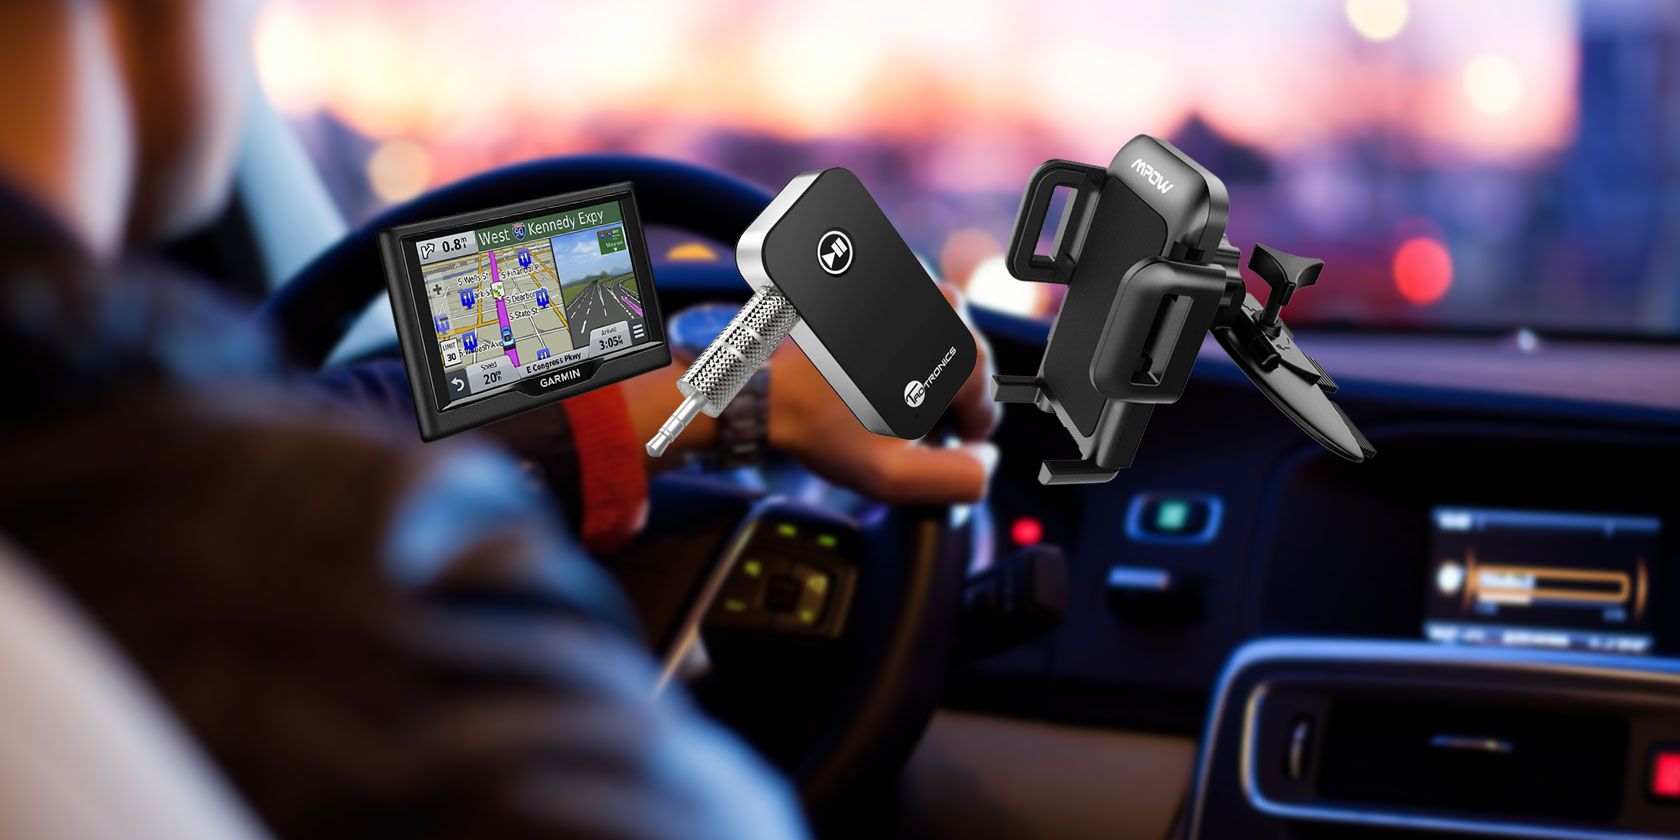 The 10 Best Car Gadgets Dash Cams, Navigation, Bluetooth Audio, and More